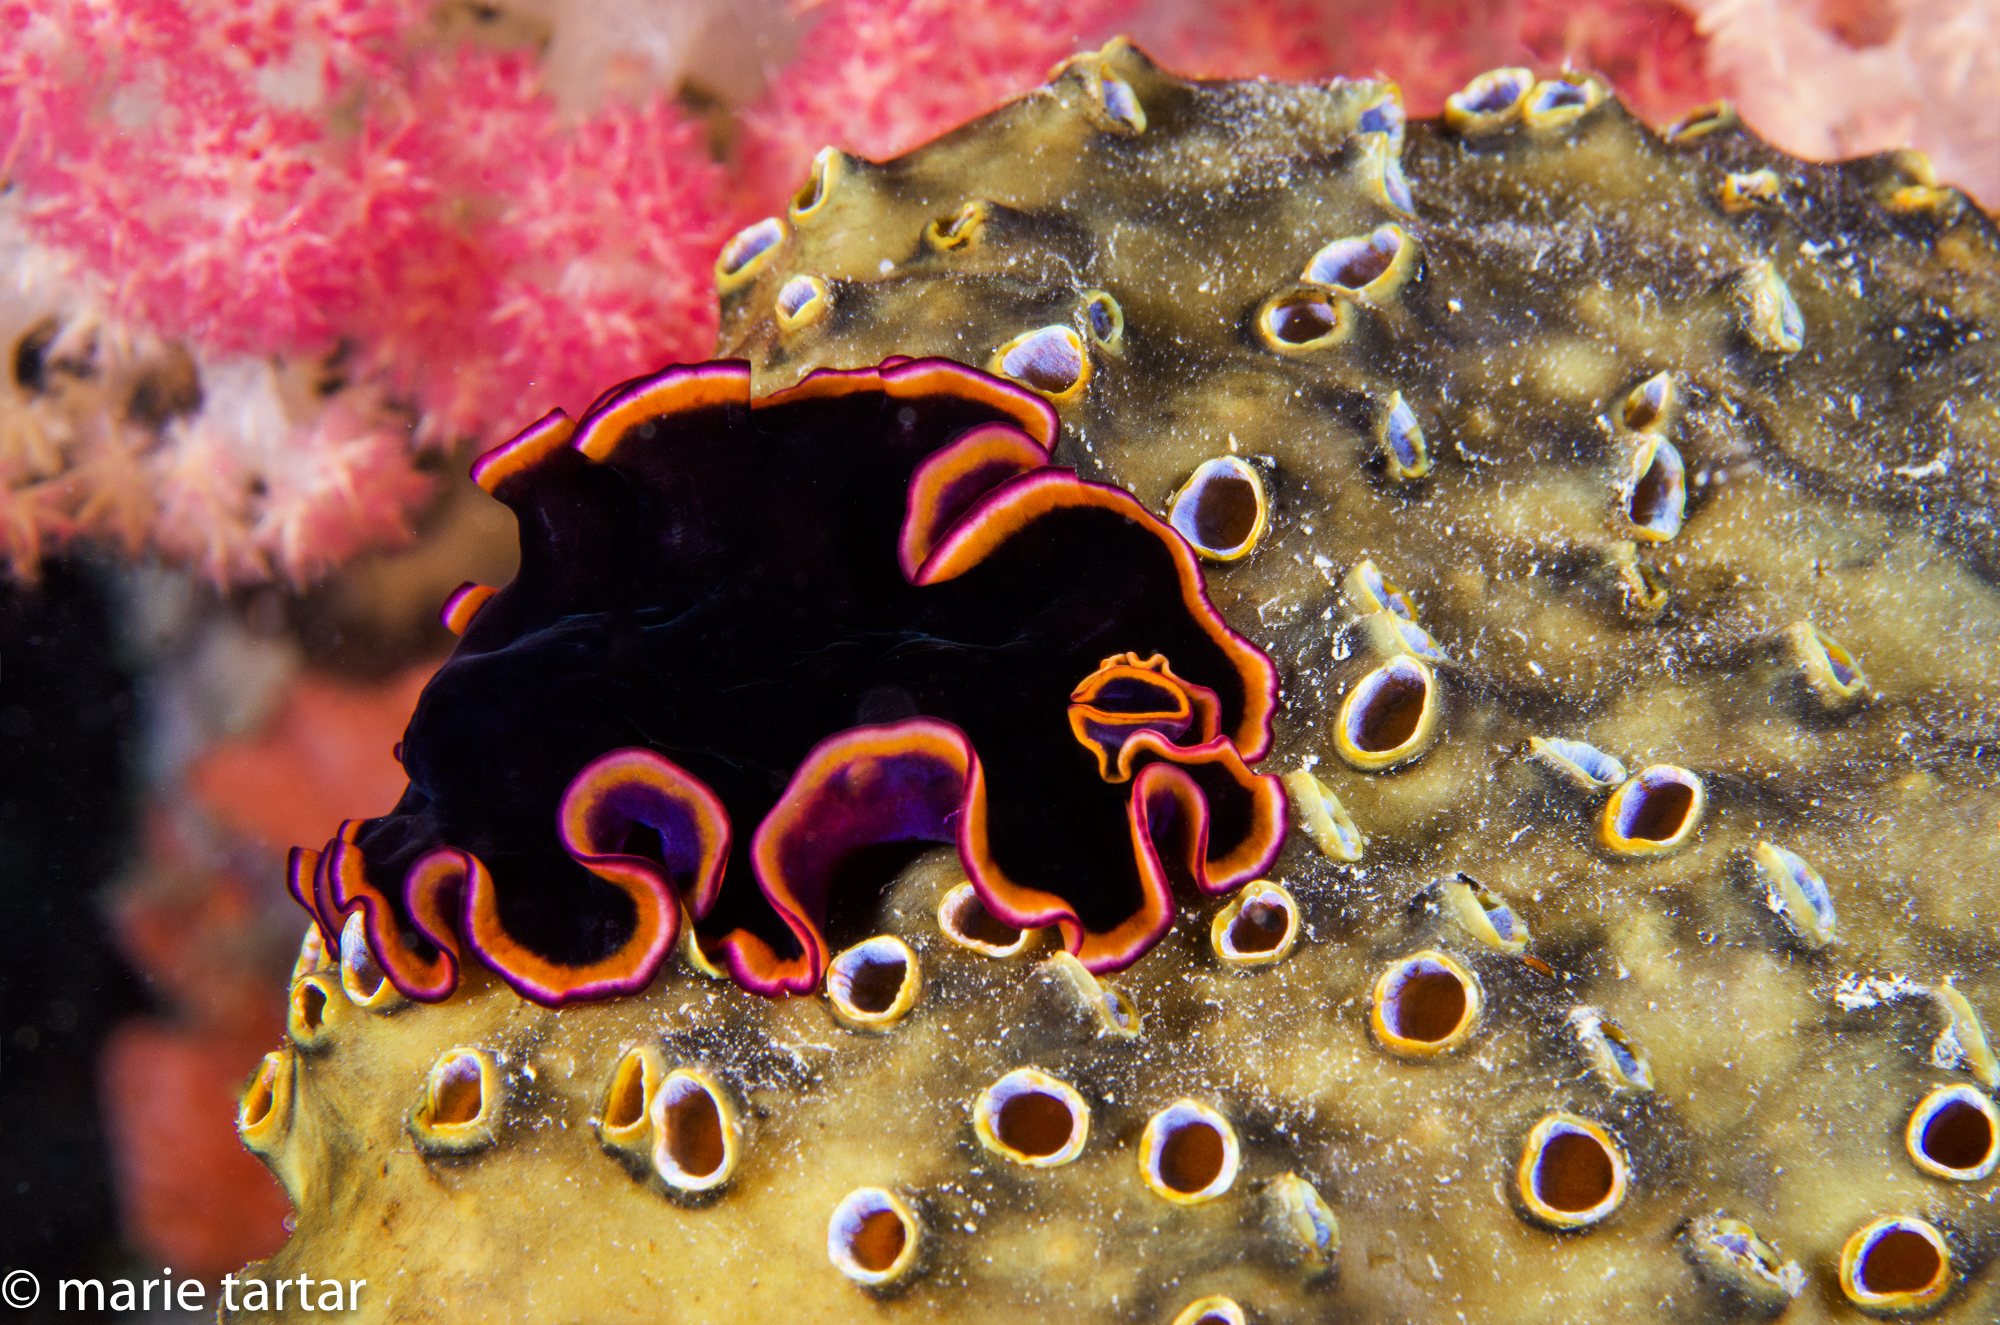 My favorite find of my last night dive in Fiji's Somosomo Strait, a flatworm on a tunicate